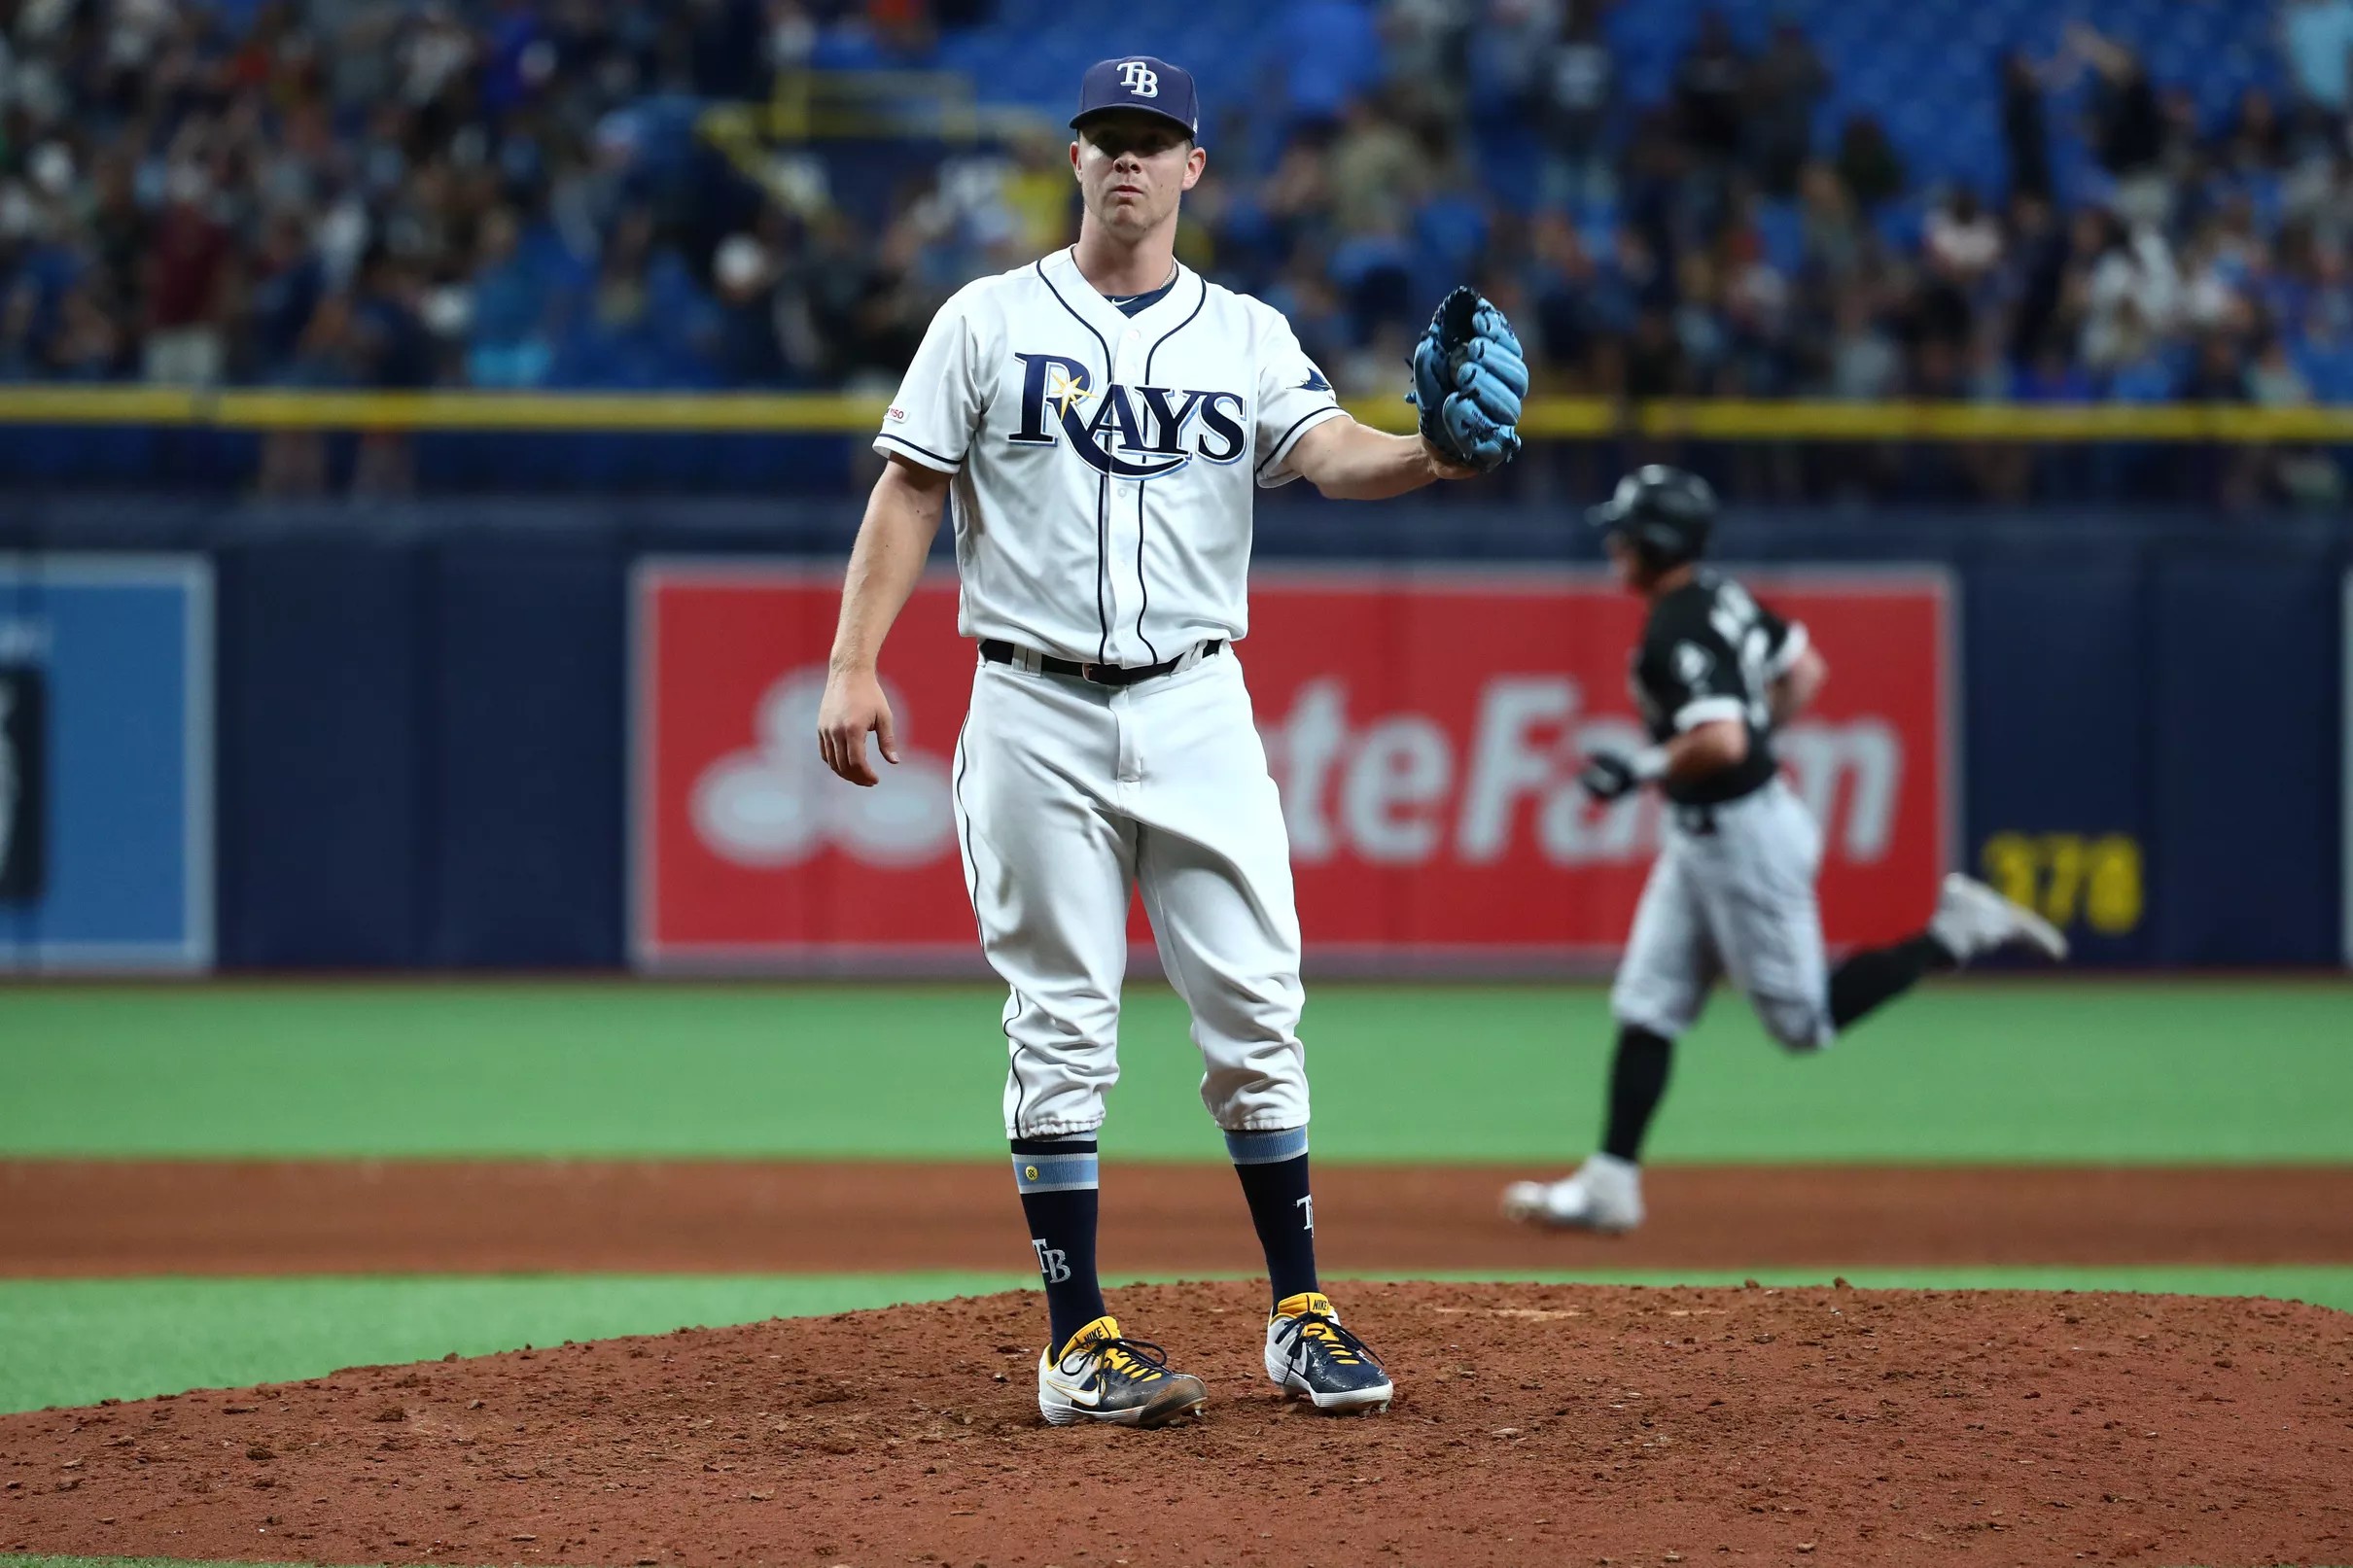 Rays 1, White Sox 2 One out away from a win, Rays drop the series in